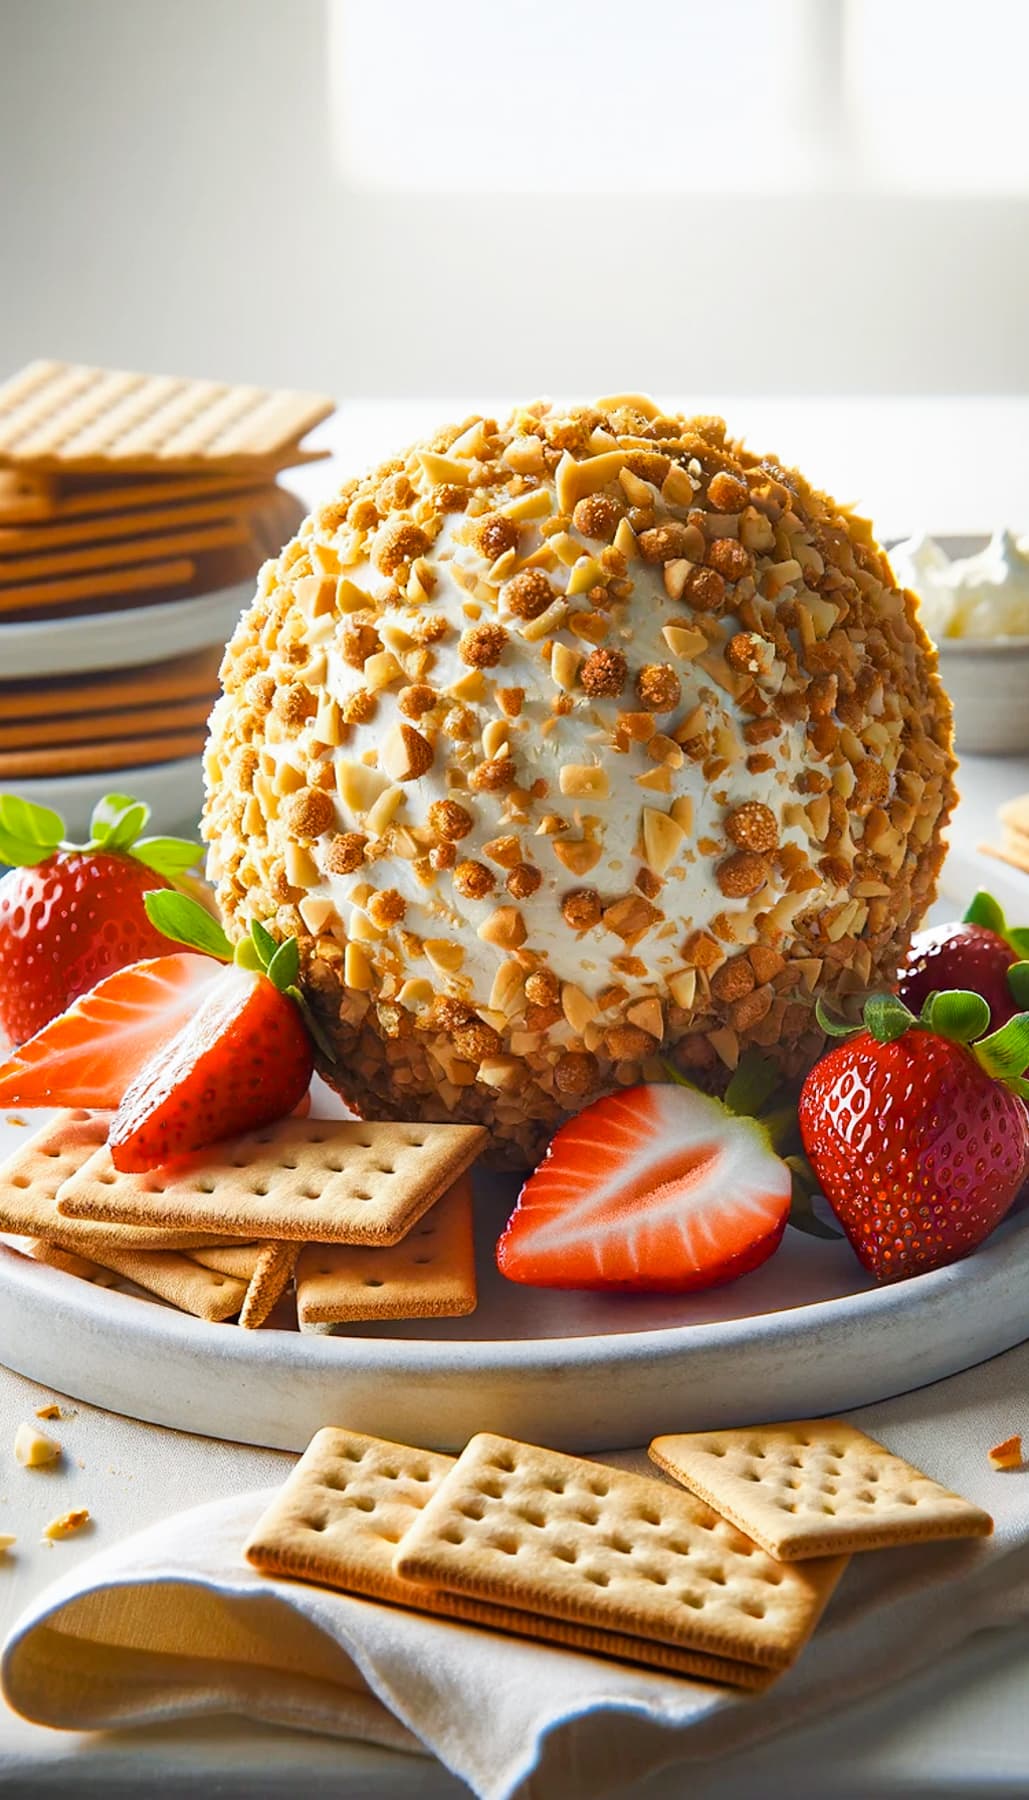 Cheese ball covered in chopped nuts and served with strawberries and graham crackers.